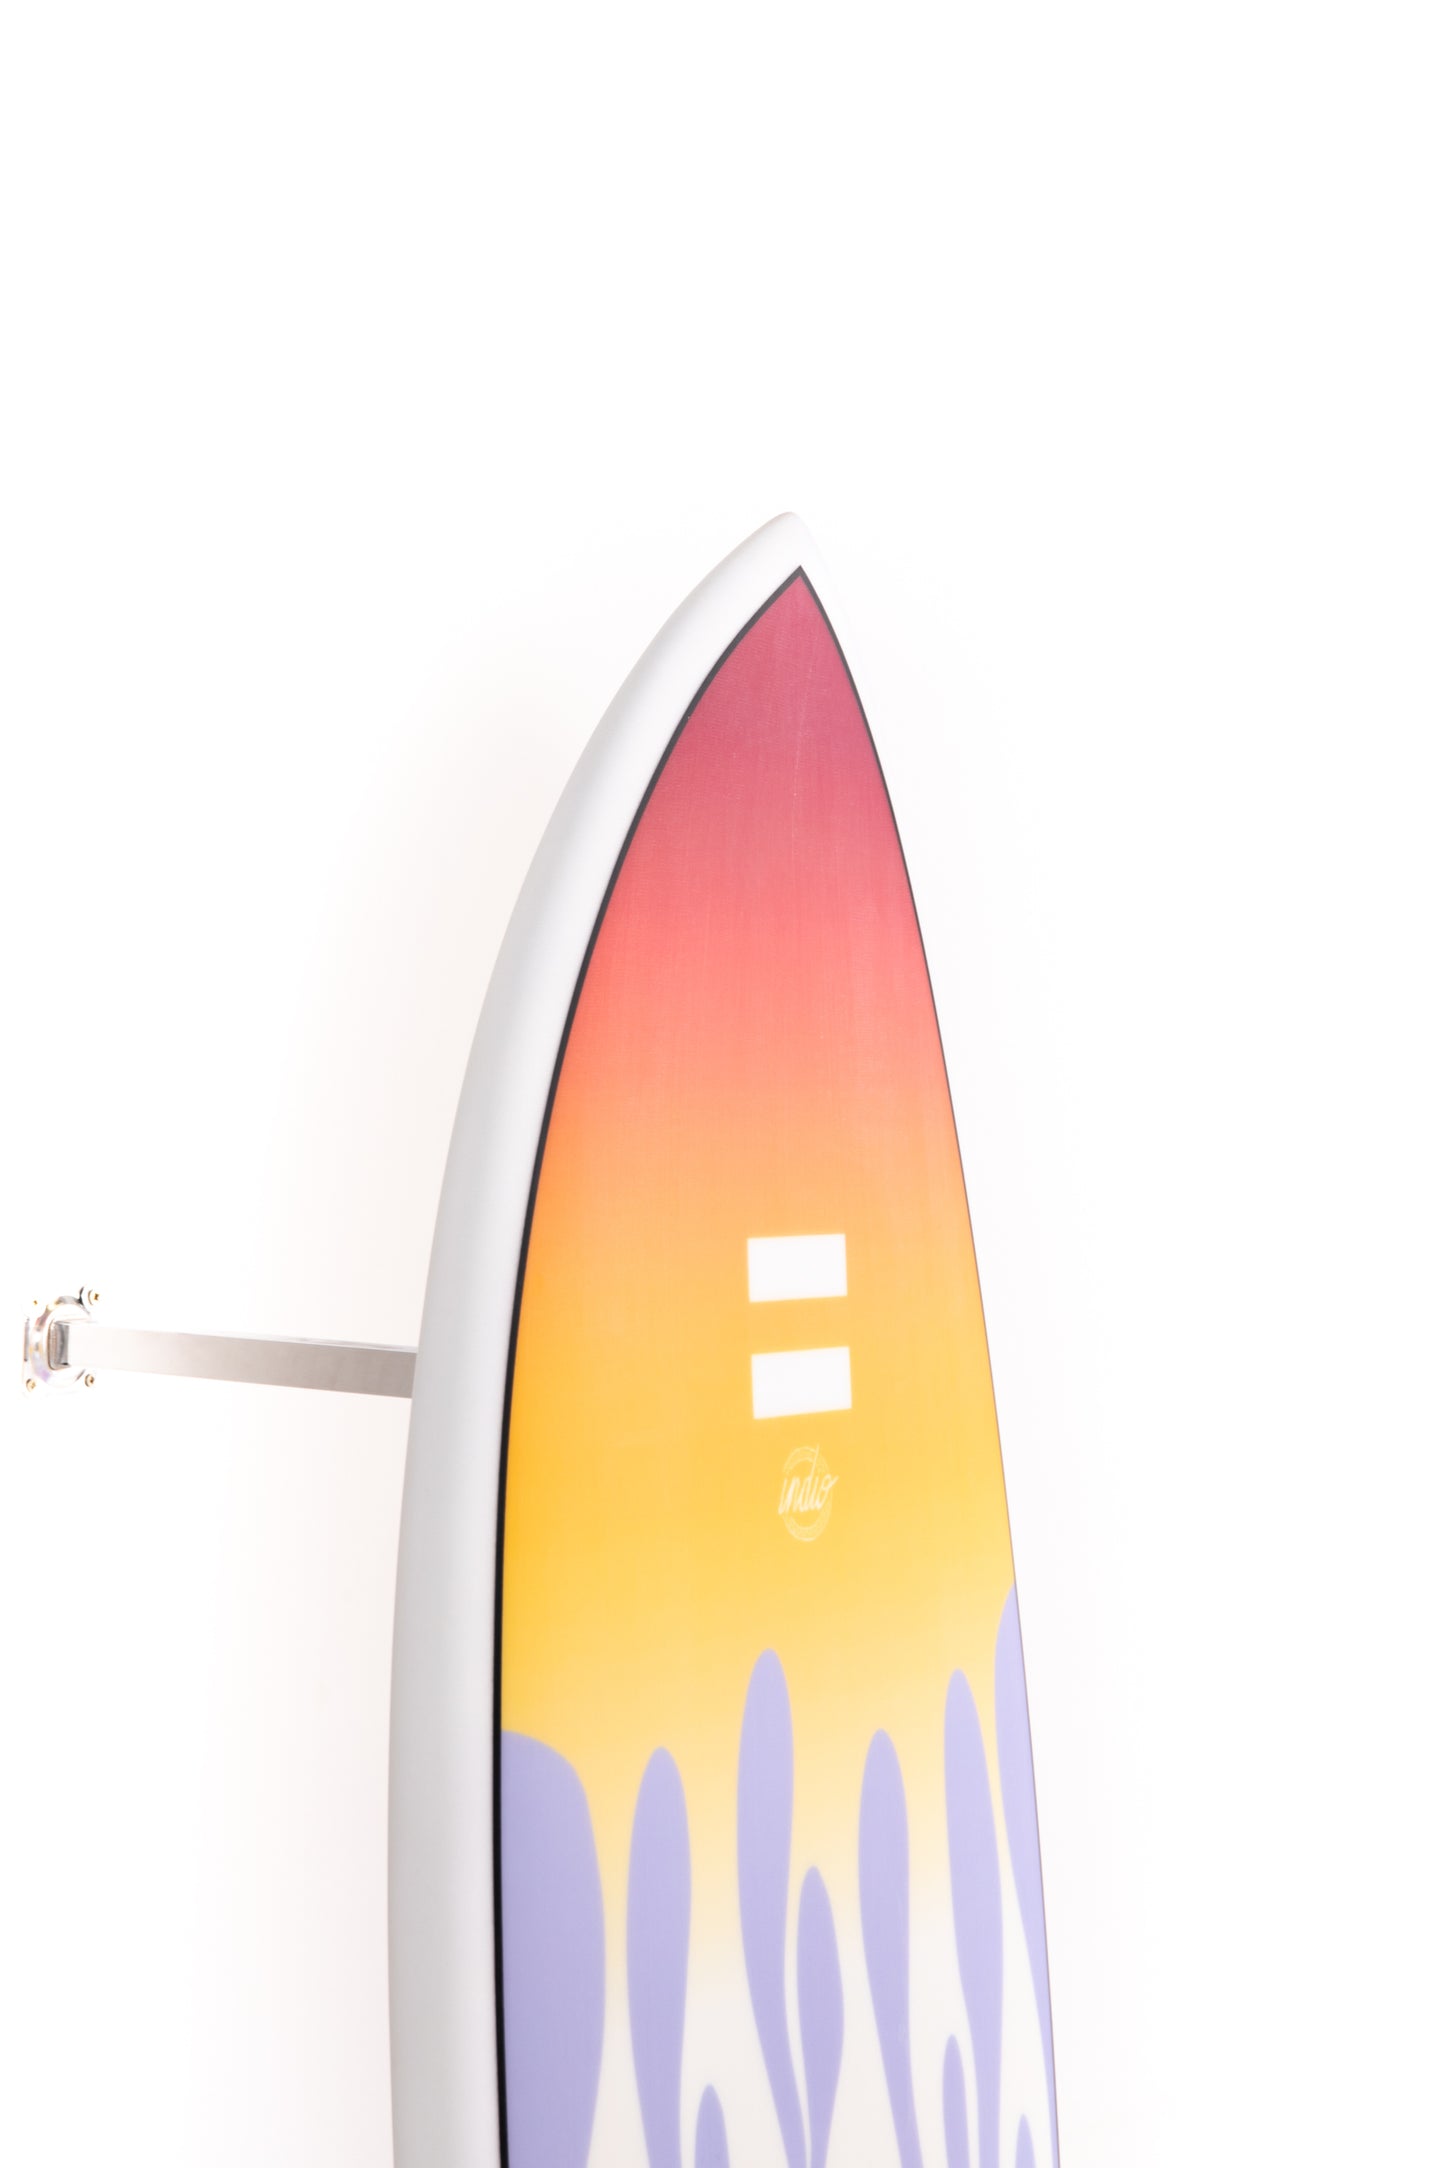 
                  
                    Pukas-Surf-Shop-Indio-Surfboards-Dab-fire-5_7
                  
                